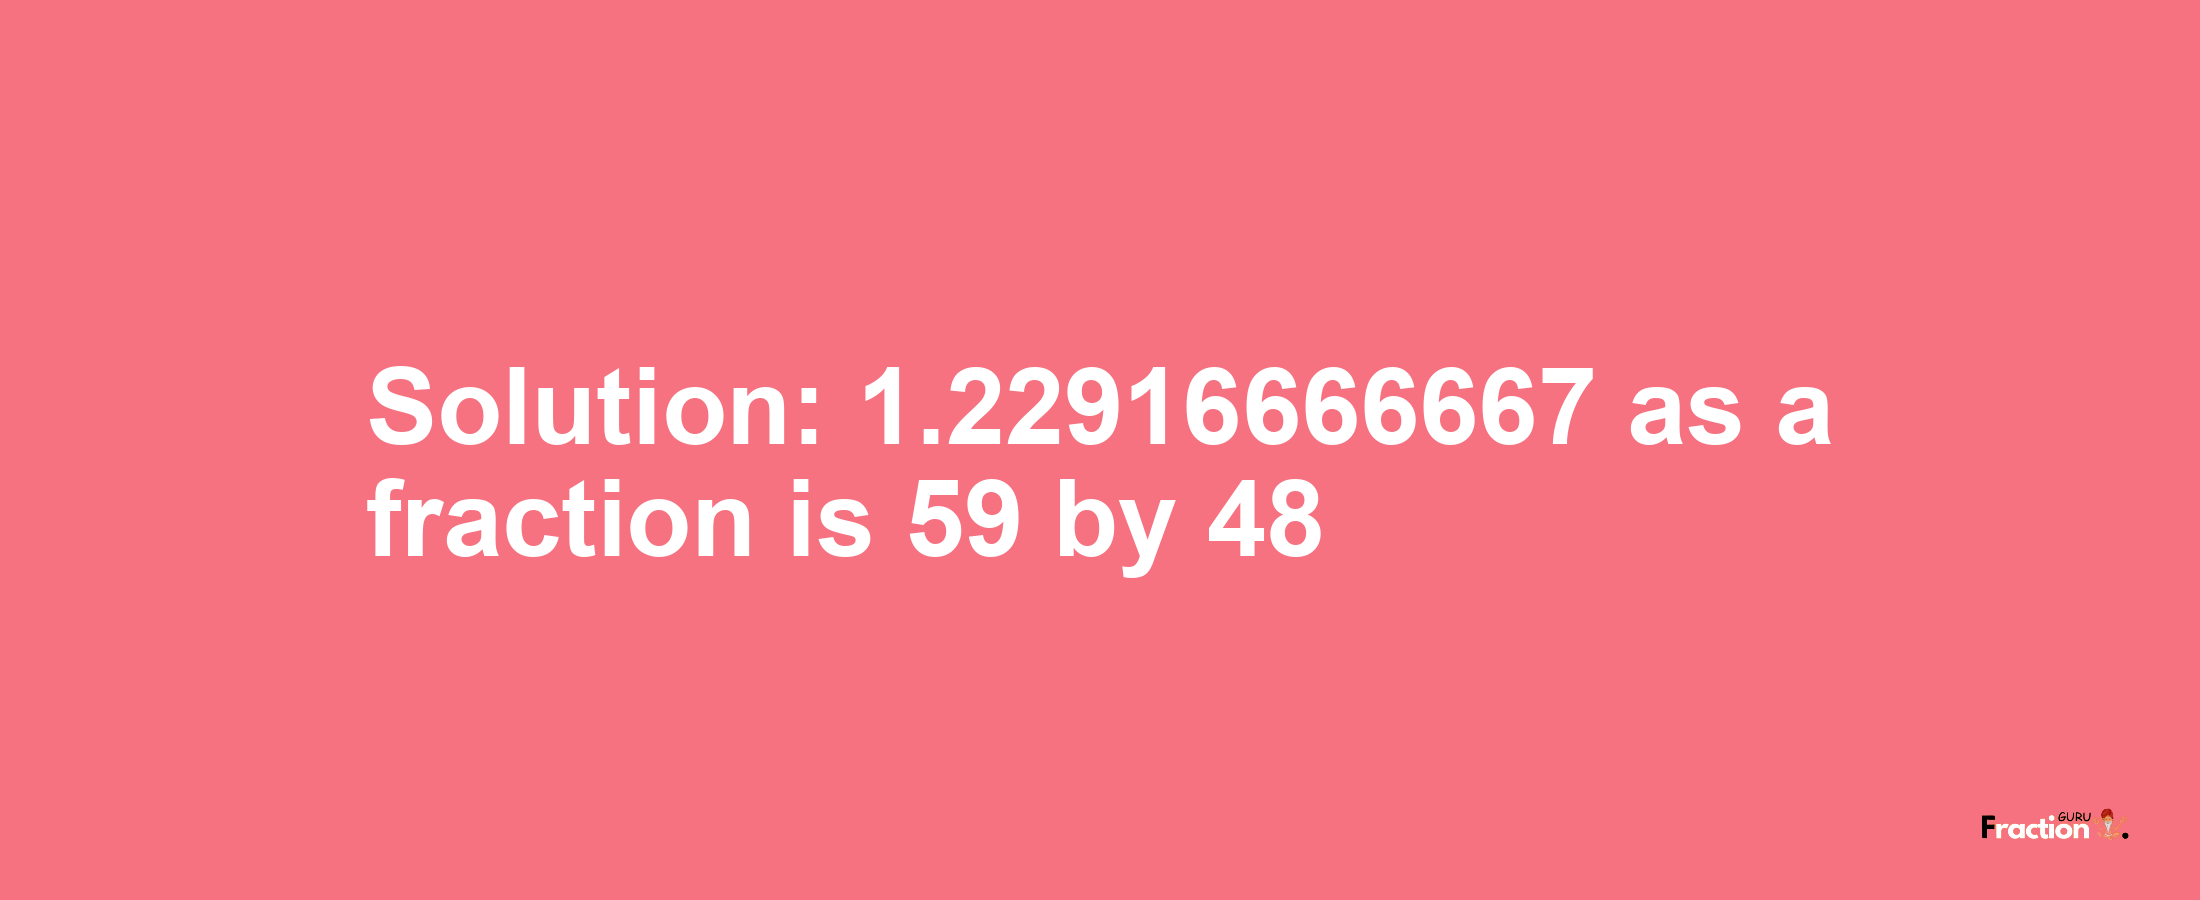 Solution:1.22916666667 as a fraction is 59/48